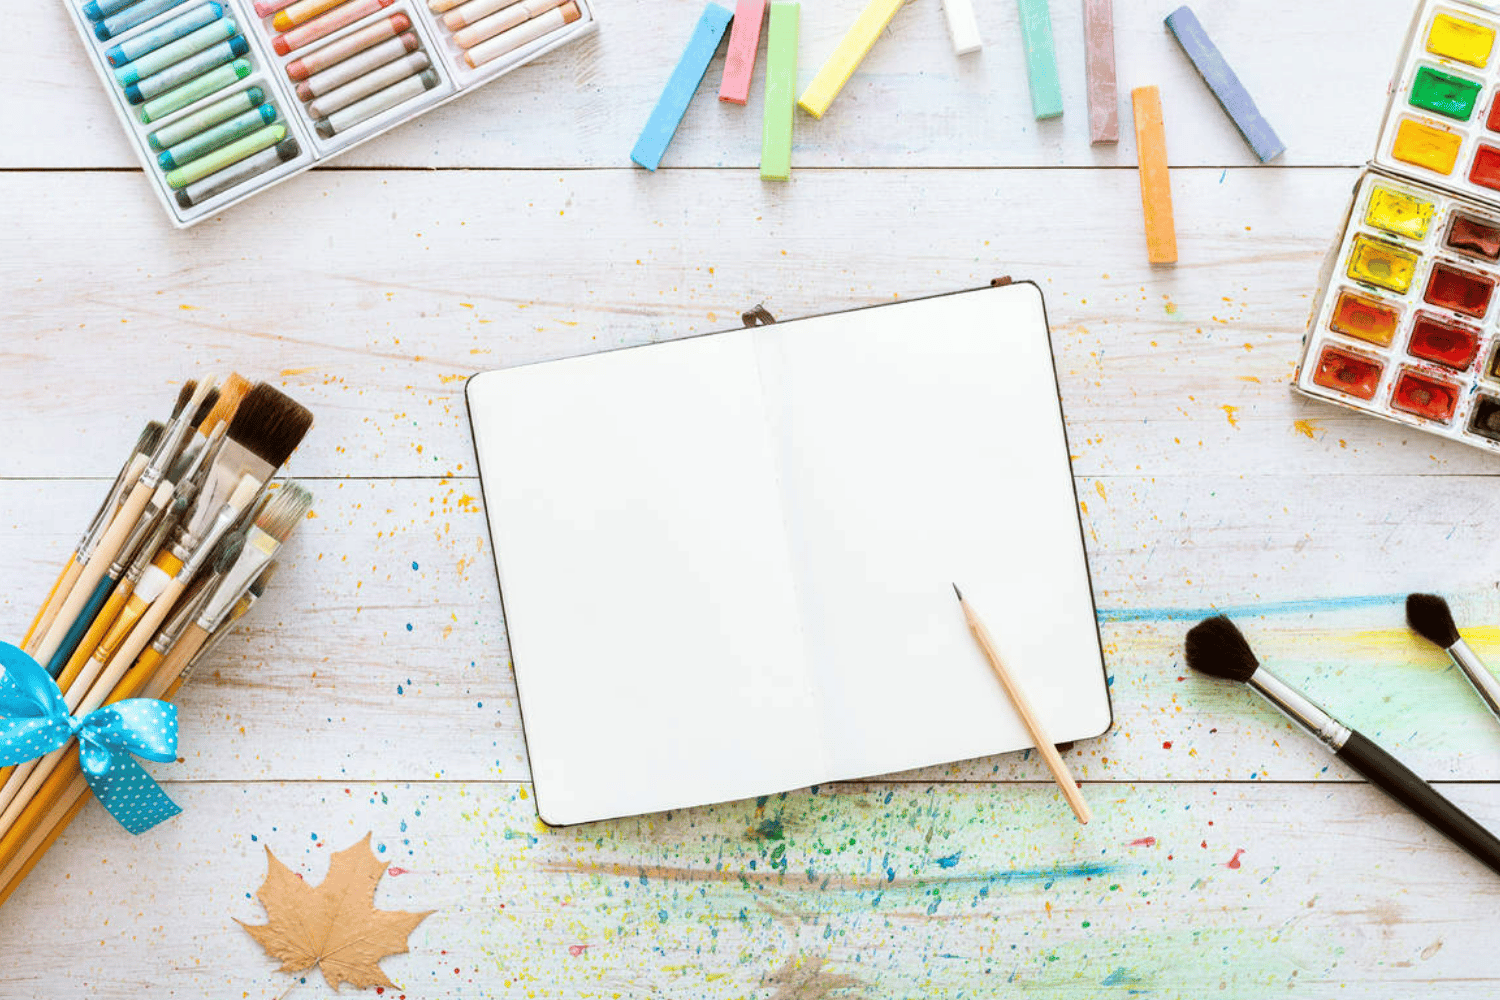 14 Best Sketchbooks for Markers Reviewed and Rated in 2023